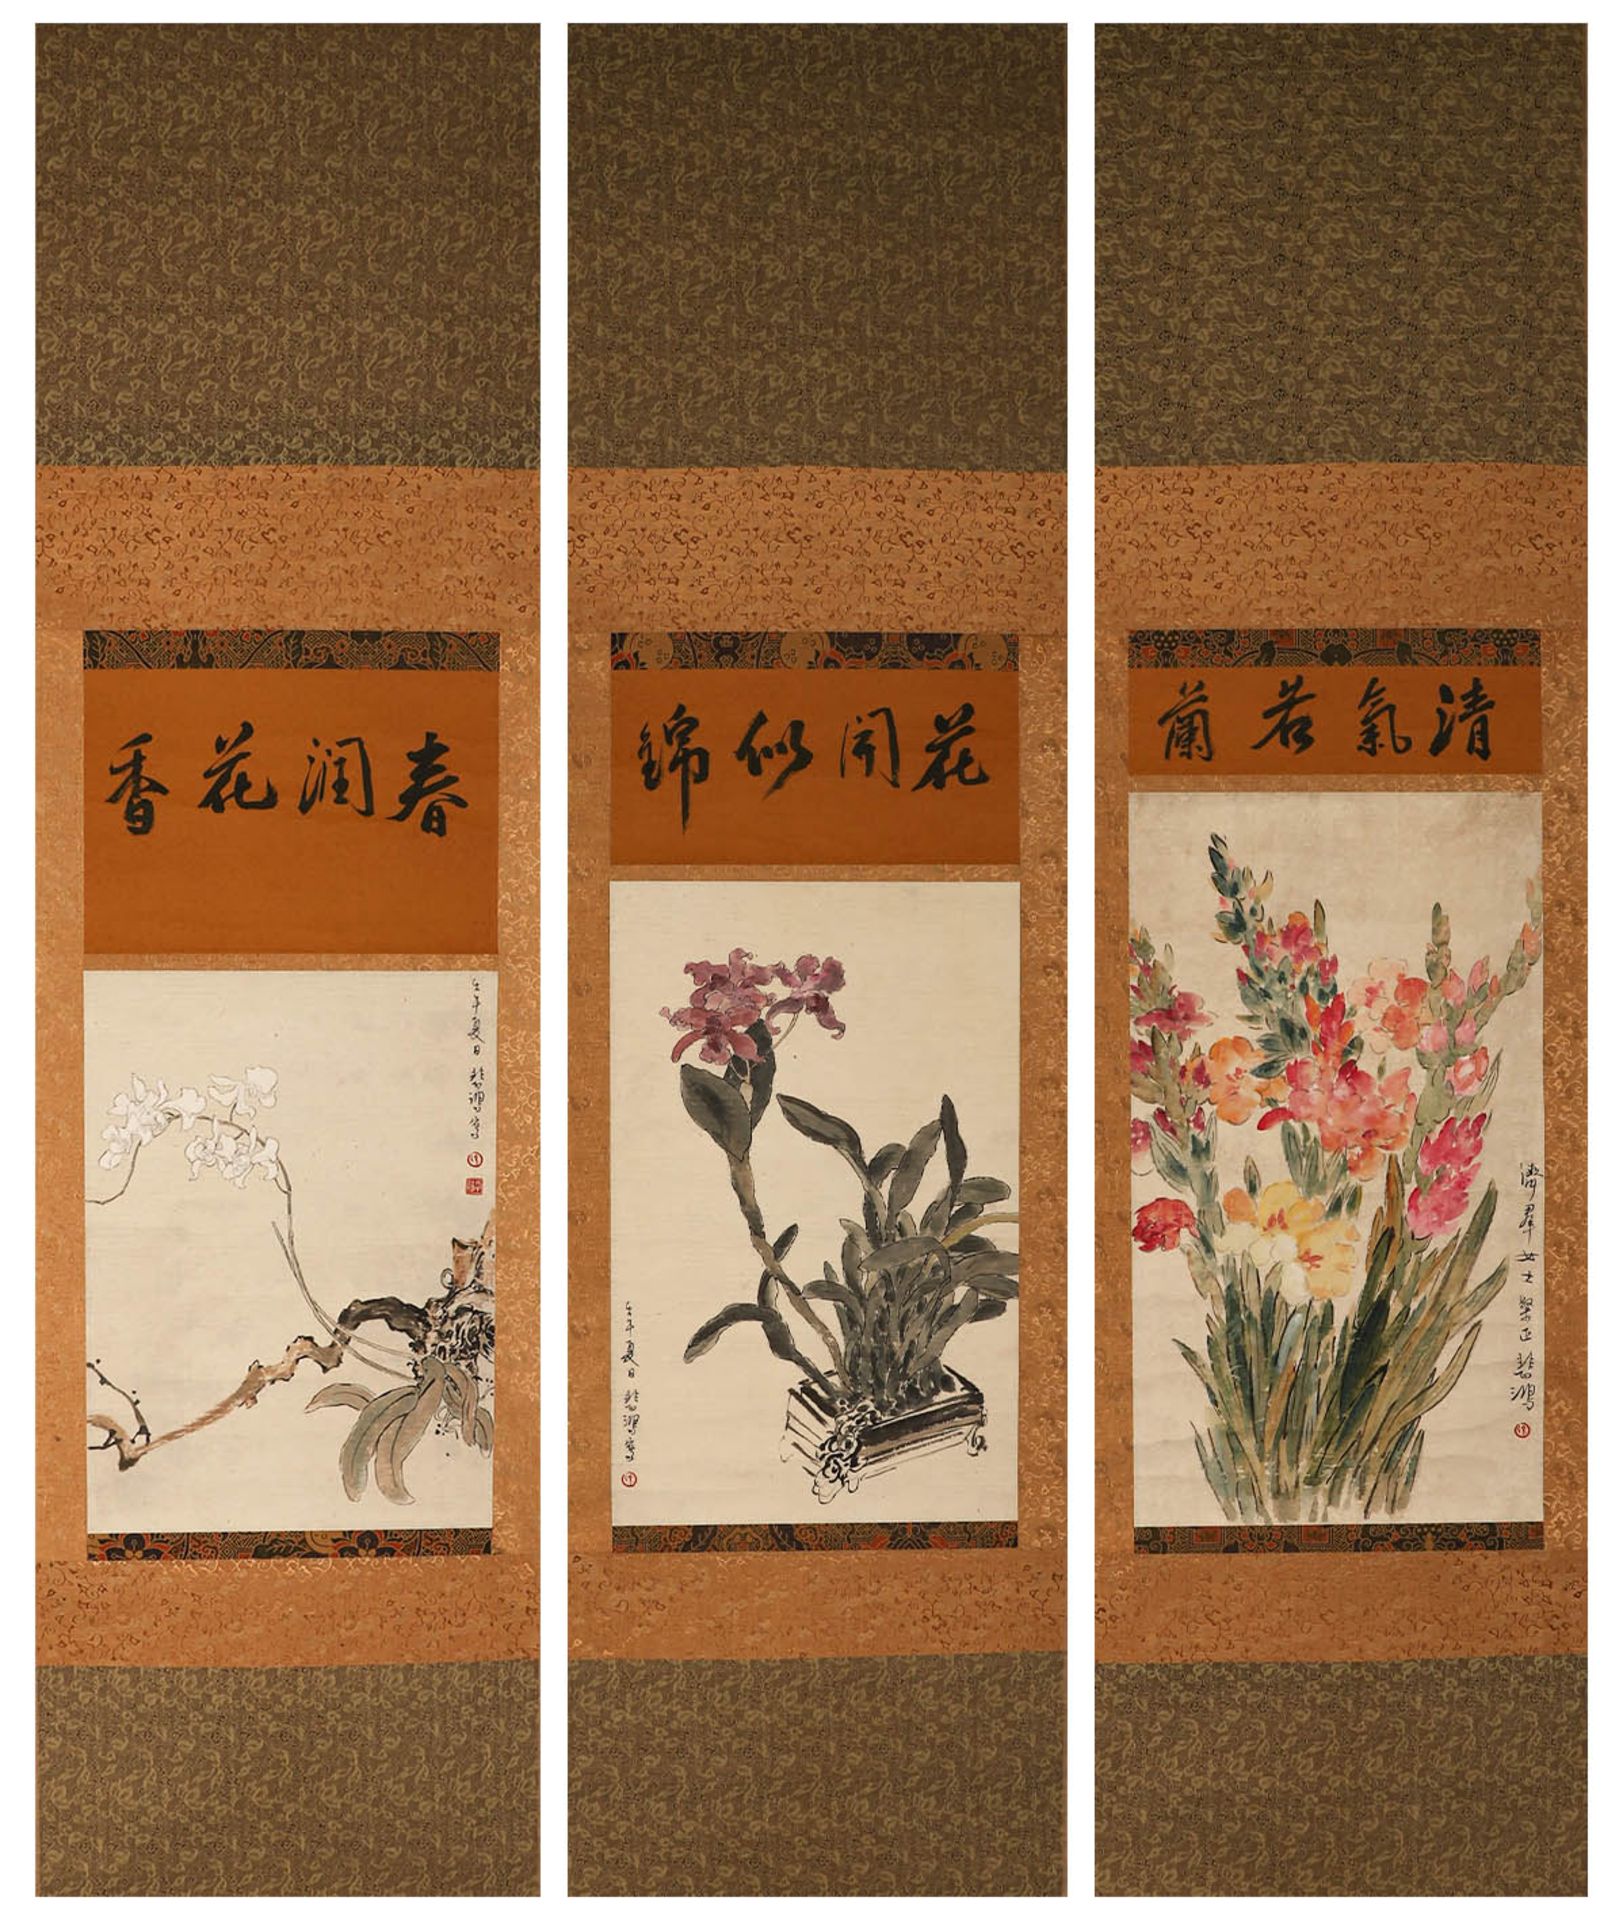 Flowers painting on paper by Xu Beihong  - Image 2 of 22